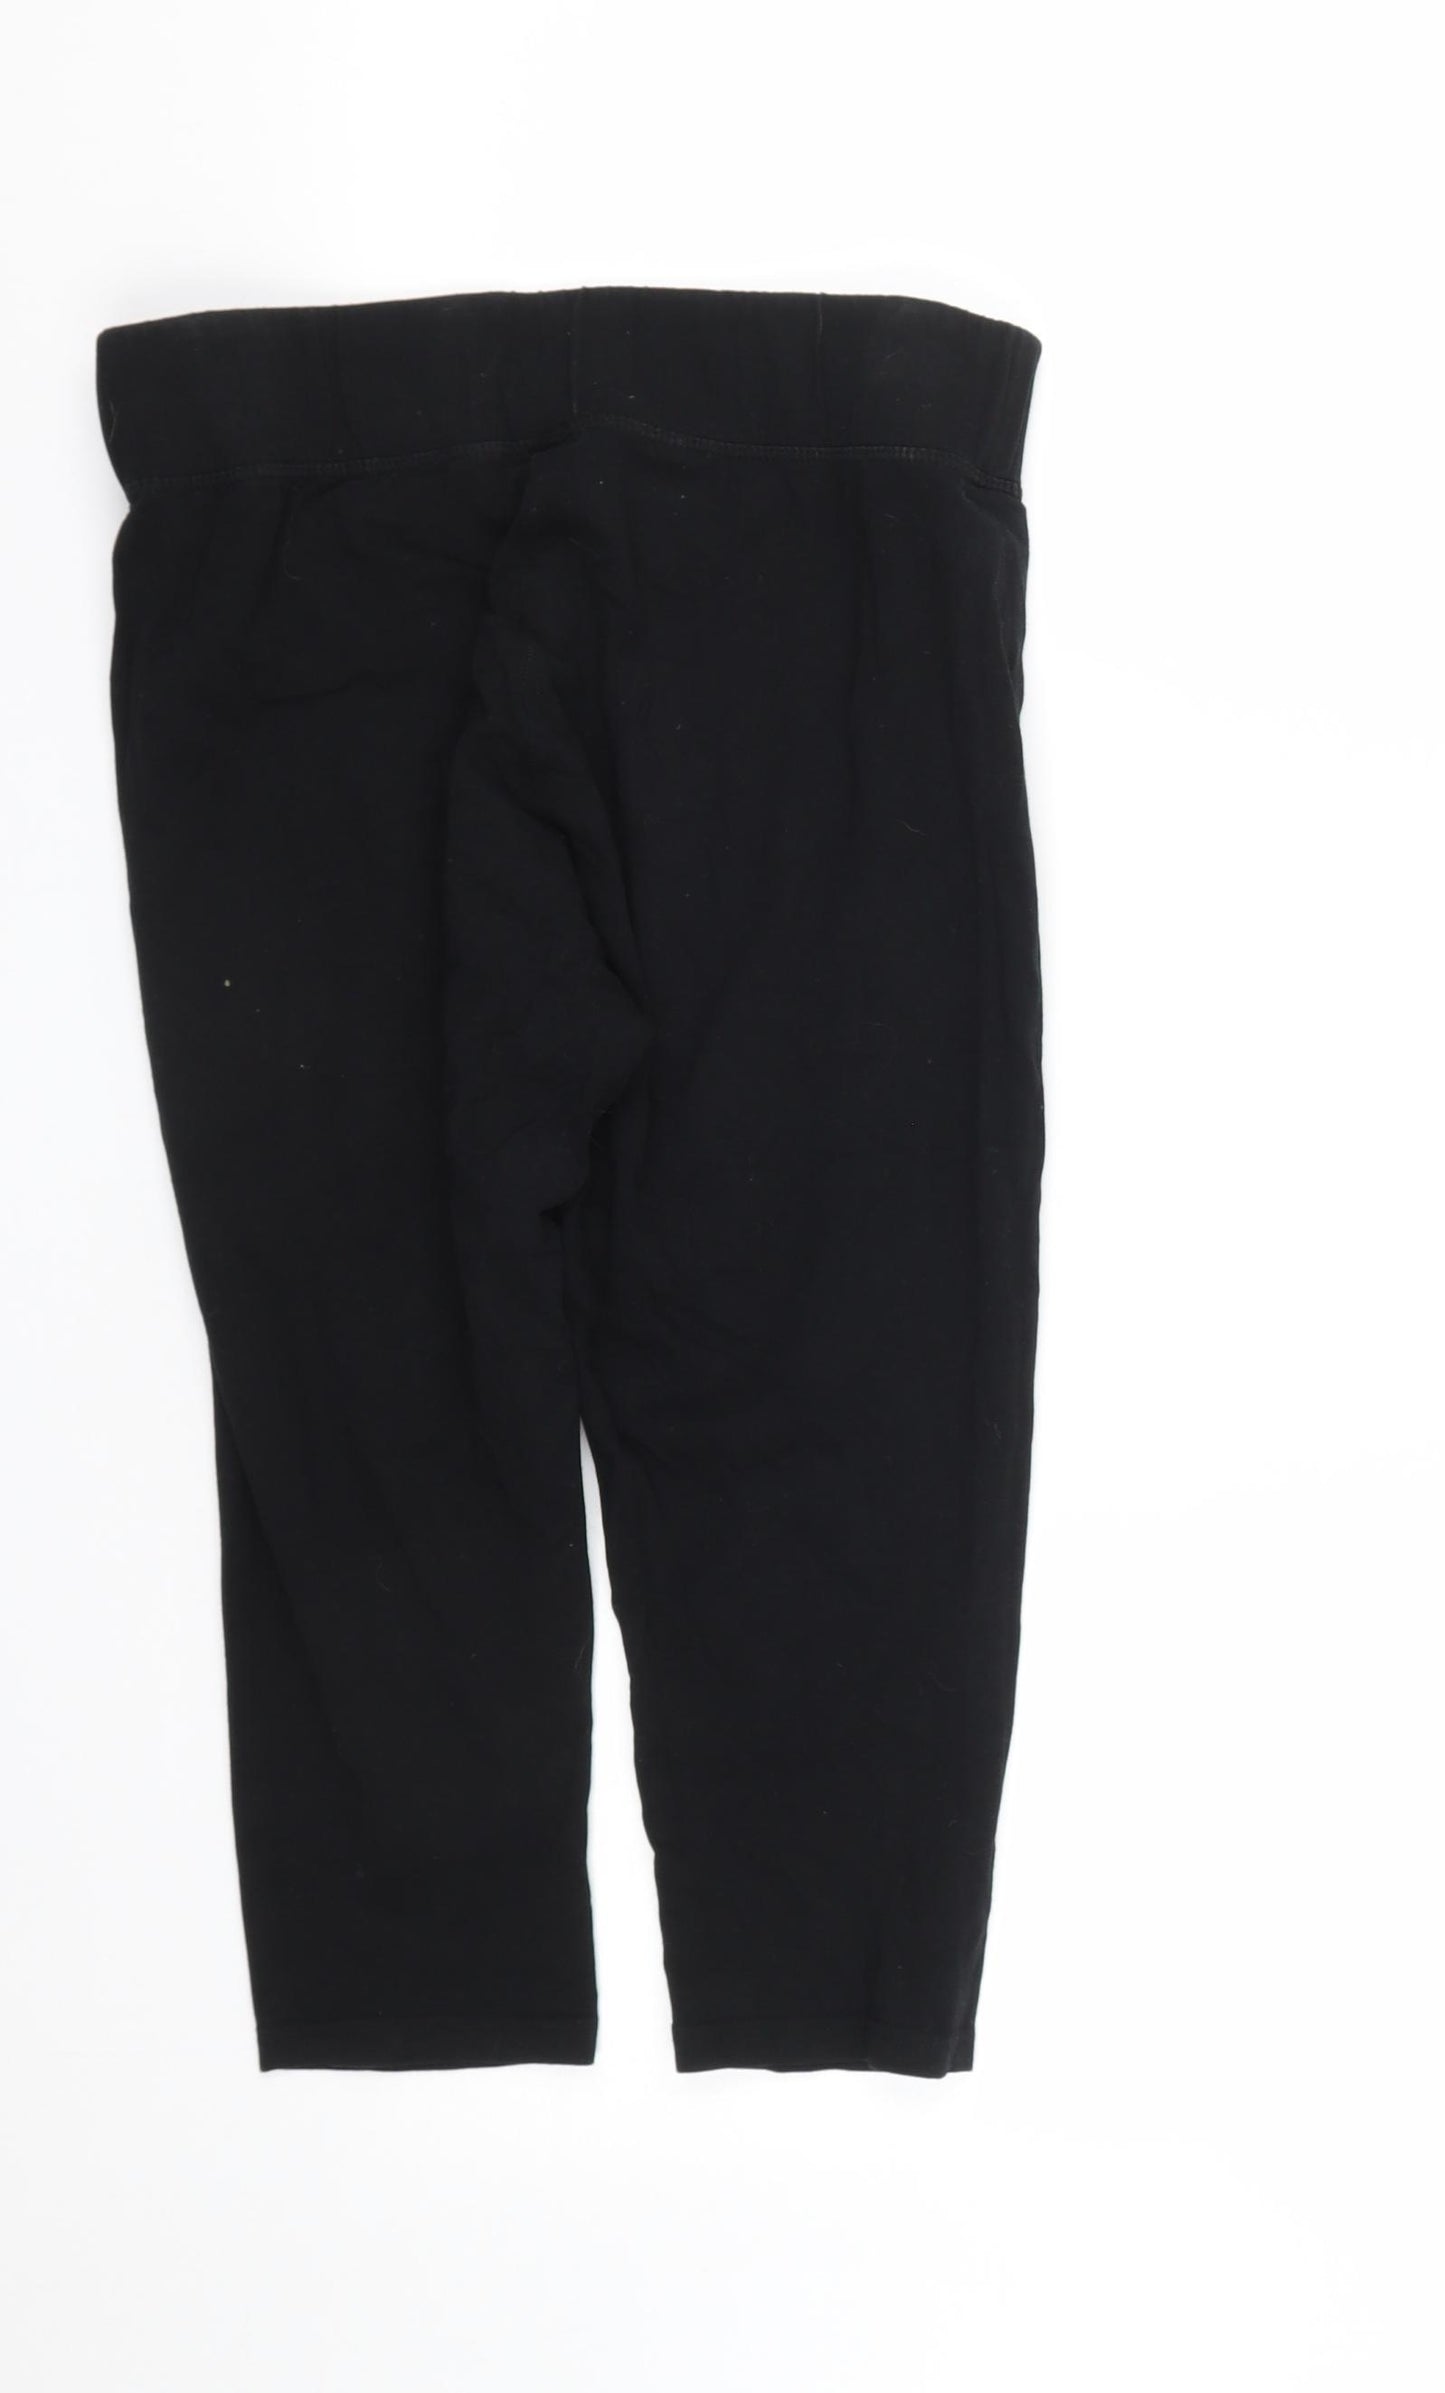 Miso Essentials Womens Black  Polyester Pedal Pusher Leggings Size 14 L20 in